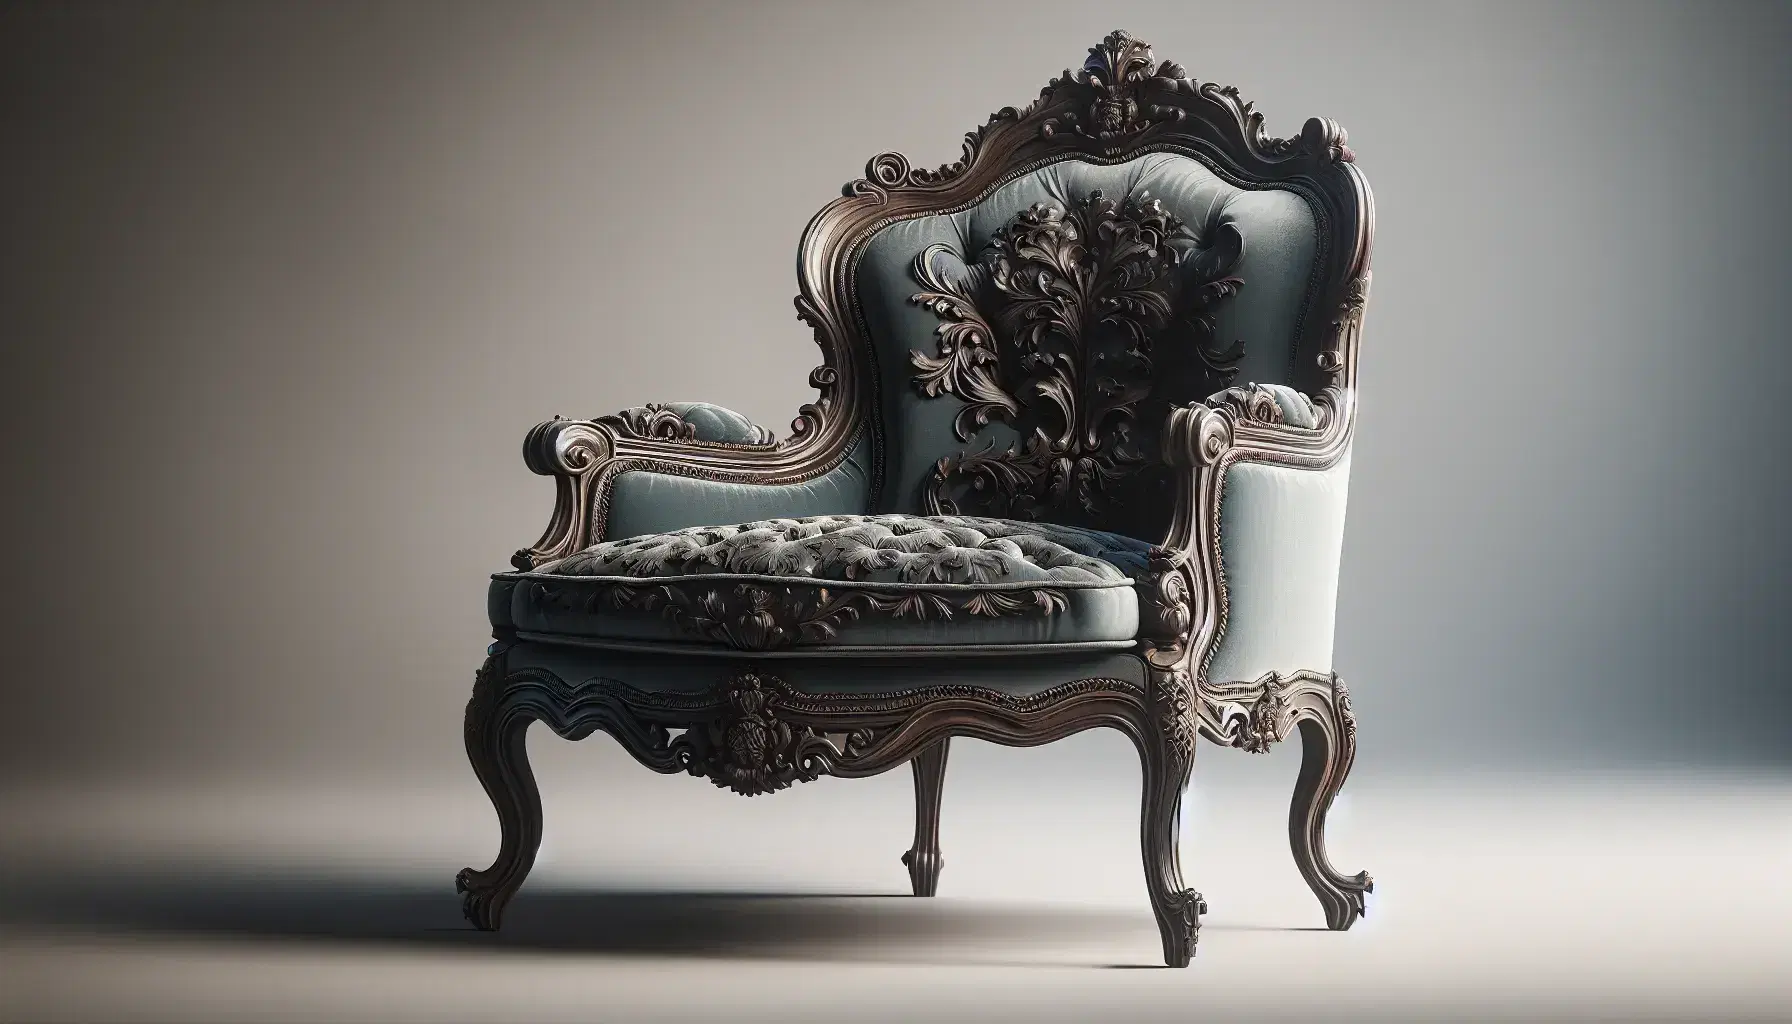 Elegant Rococo-style French armchair with dark wood carvings and plush royal blue tufted upholstery against a soft gray background.